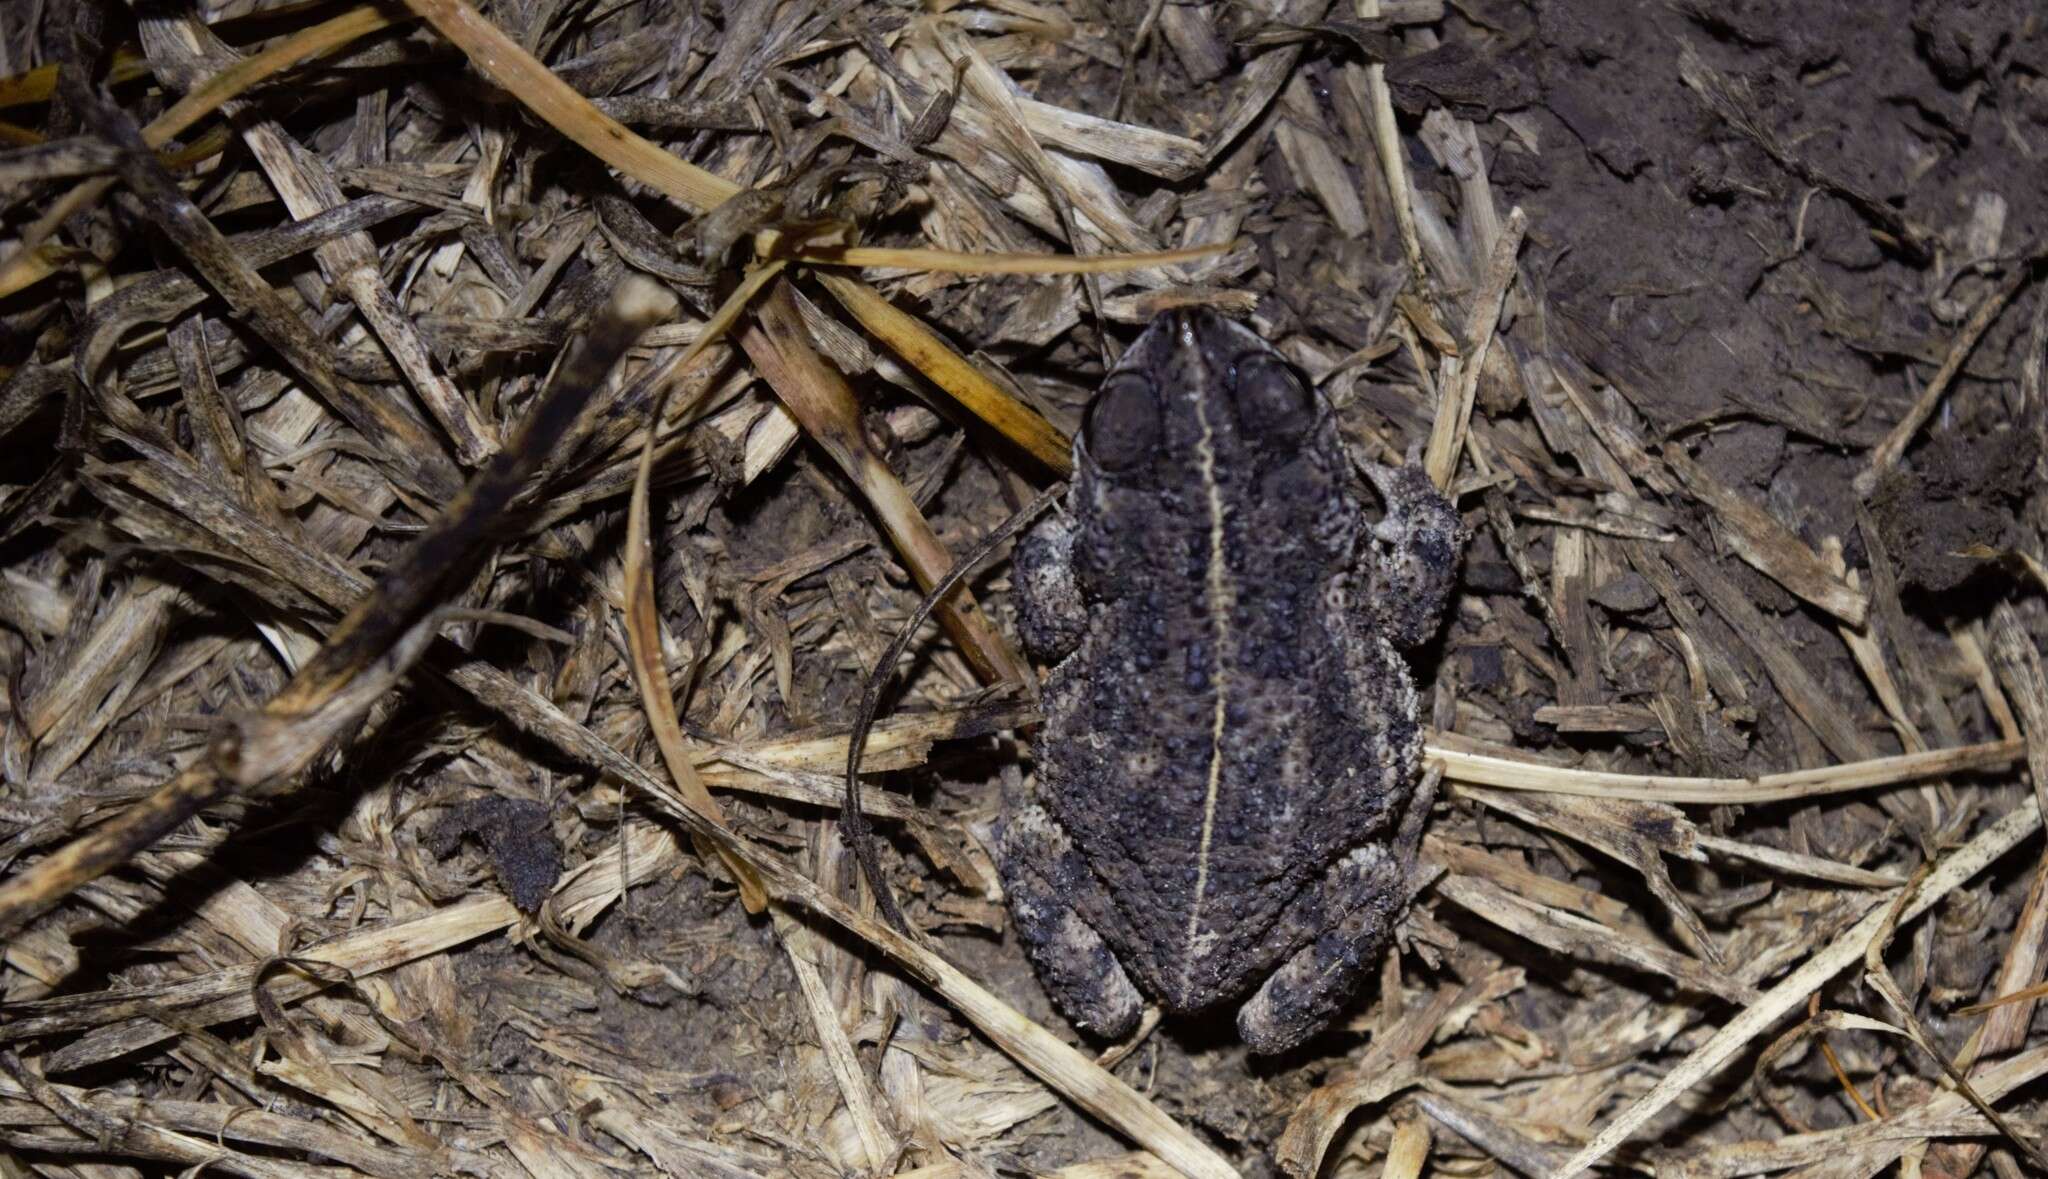 Image of Rhinella major (Müller & Hellmich 1936)